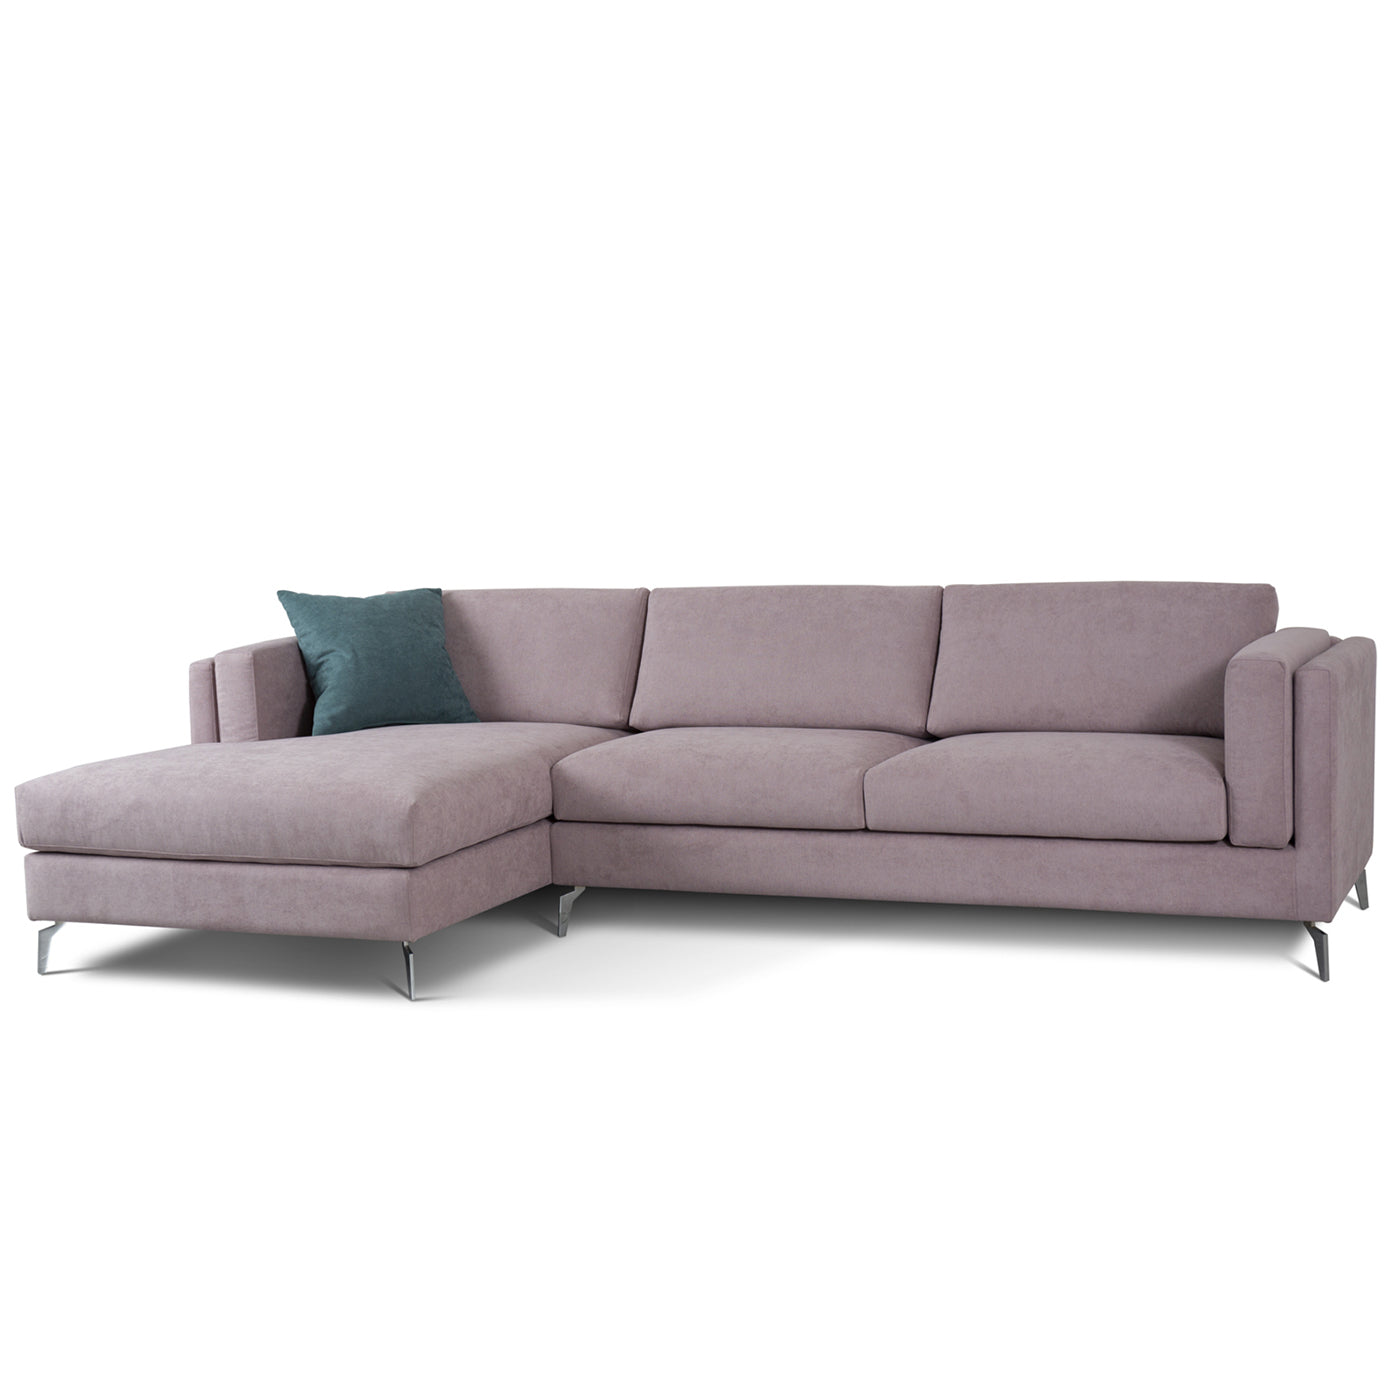 Giotto L-Shaped Pink Sofa - Alternative view 2